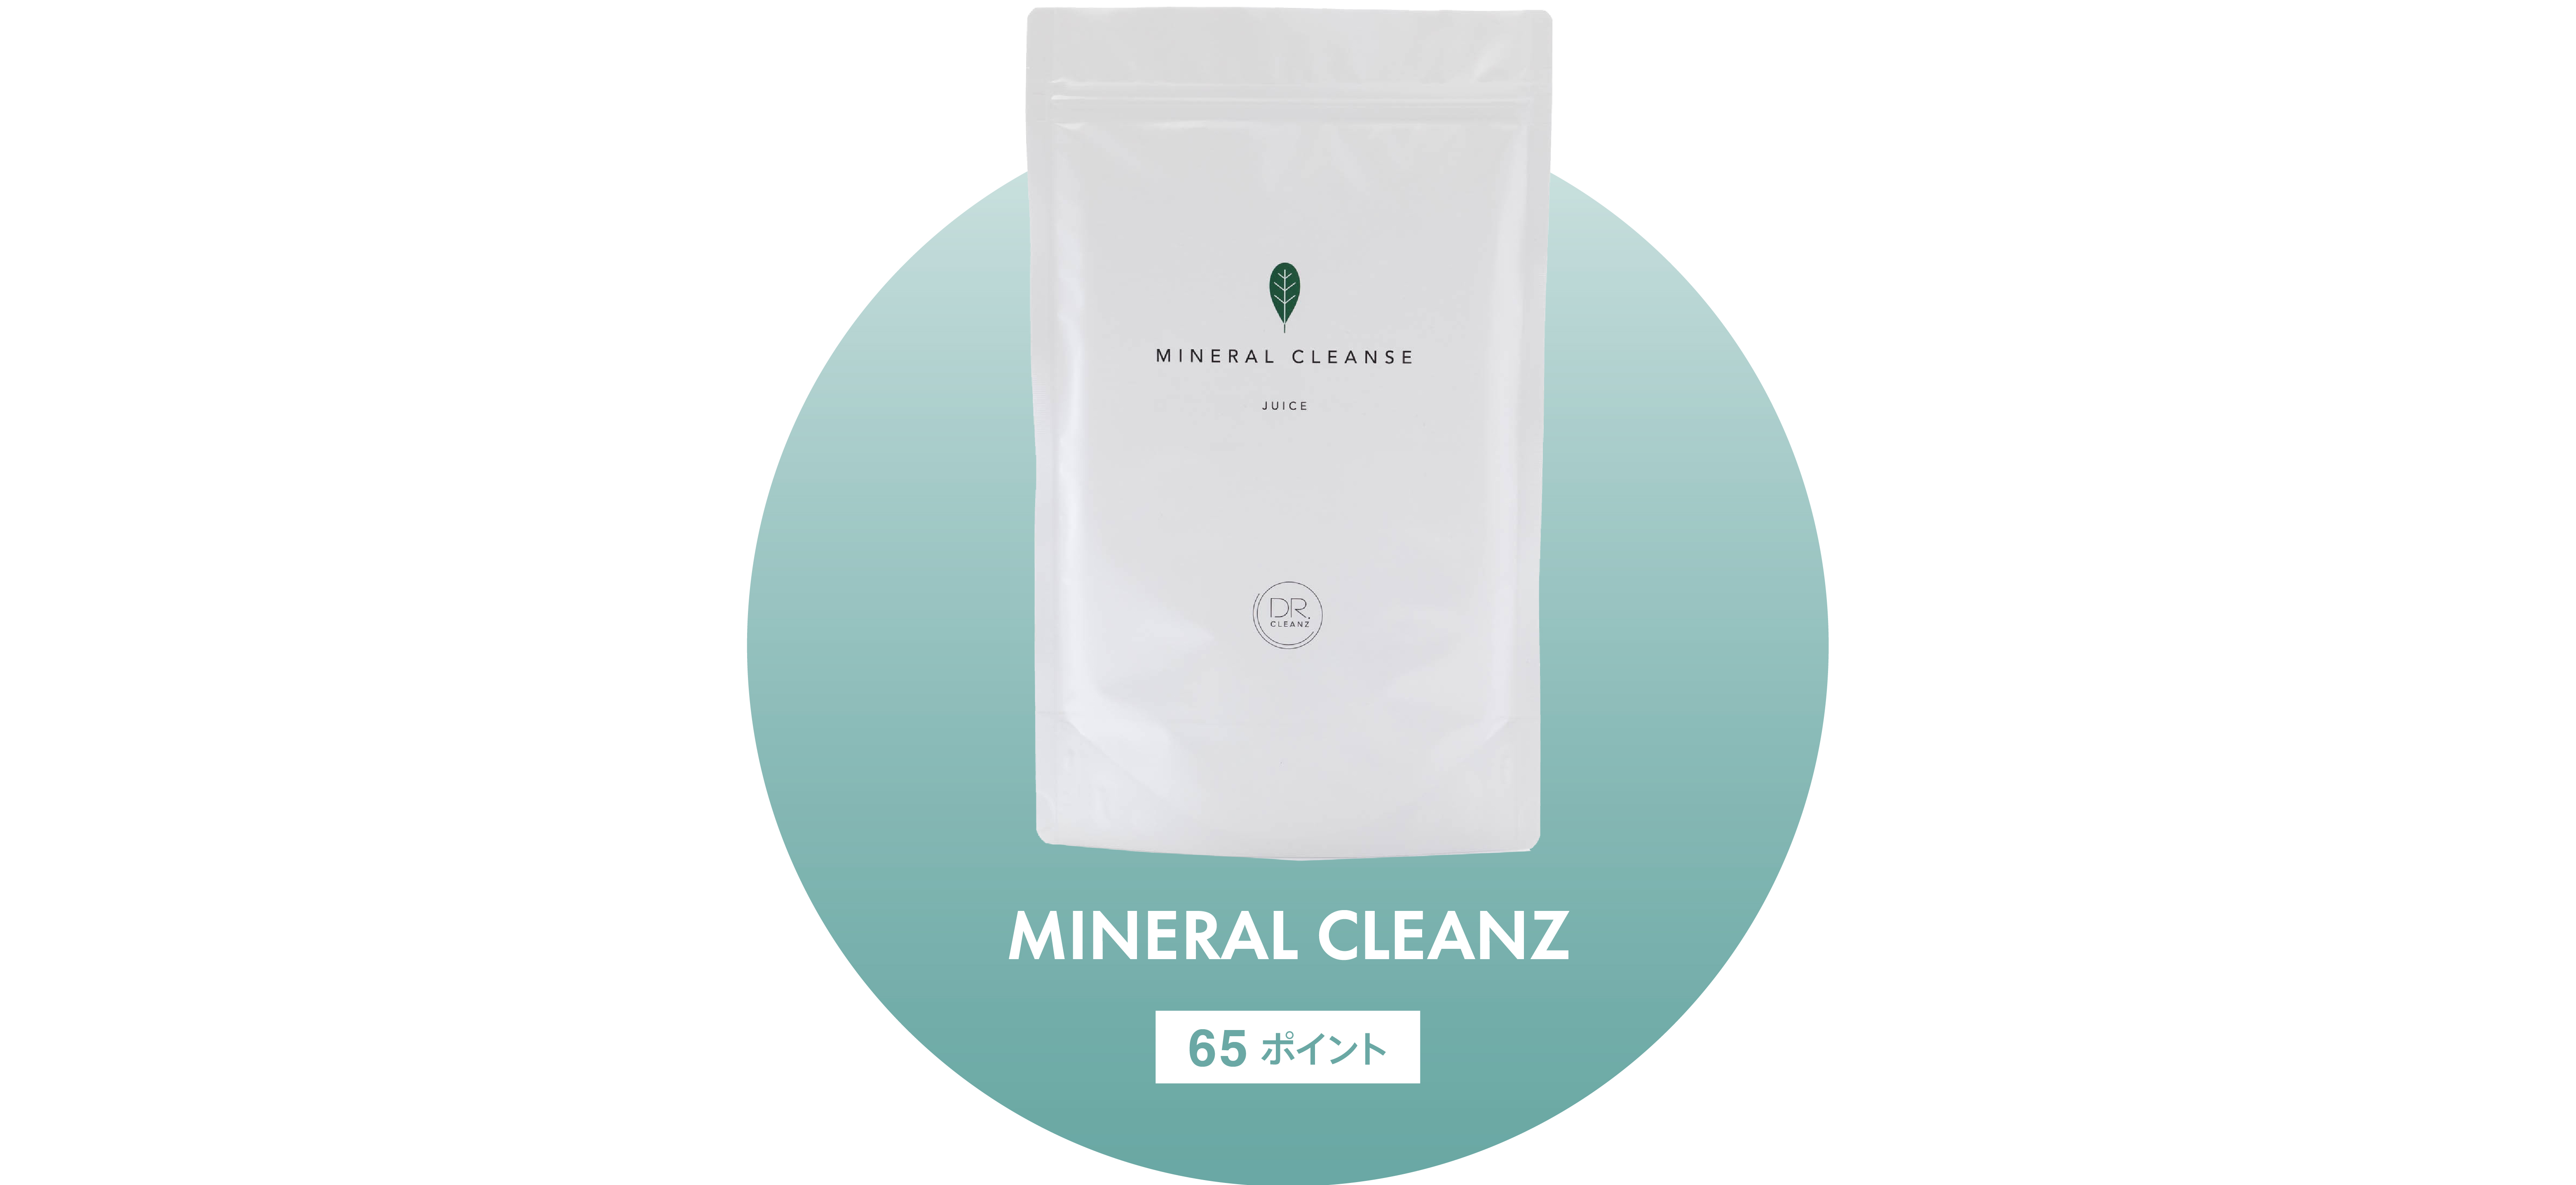 MINERAL CLEANZ